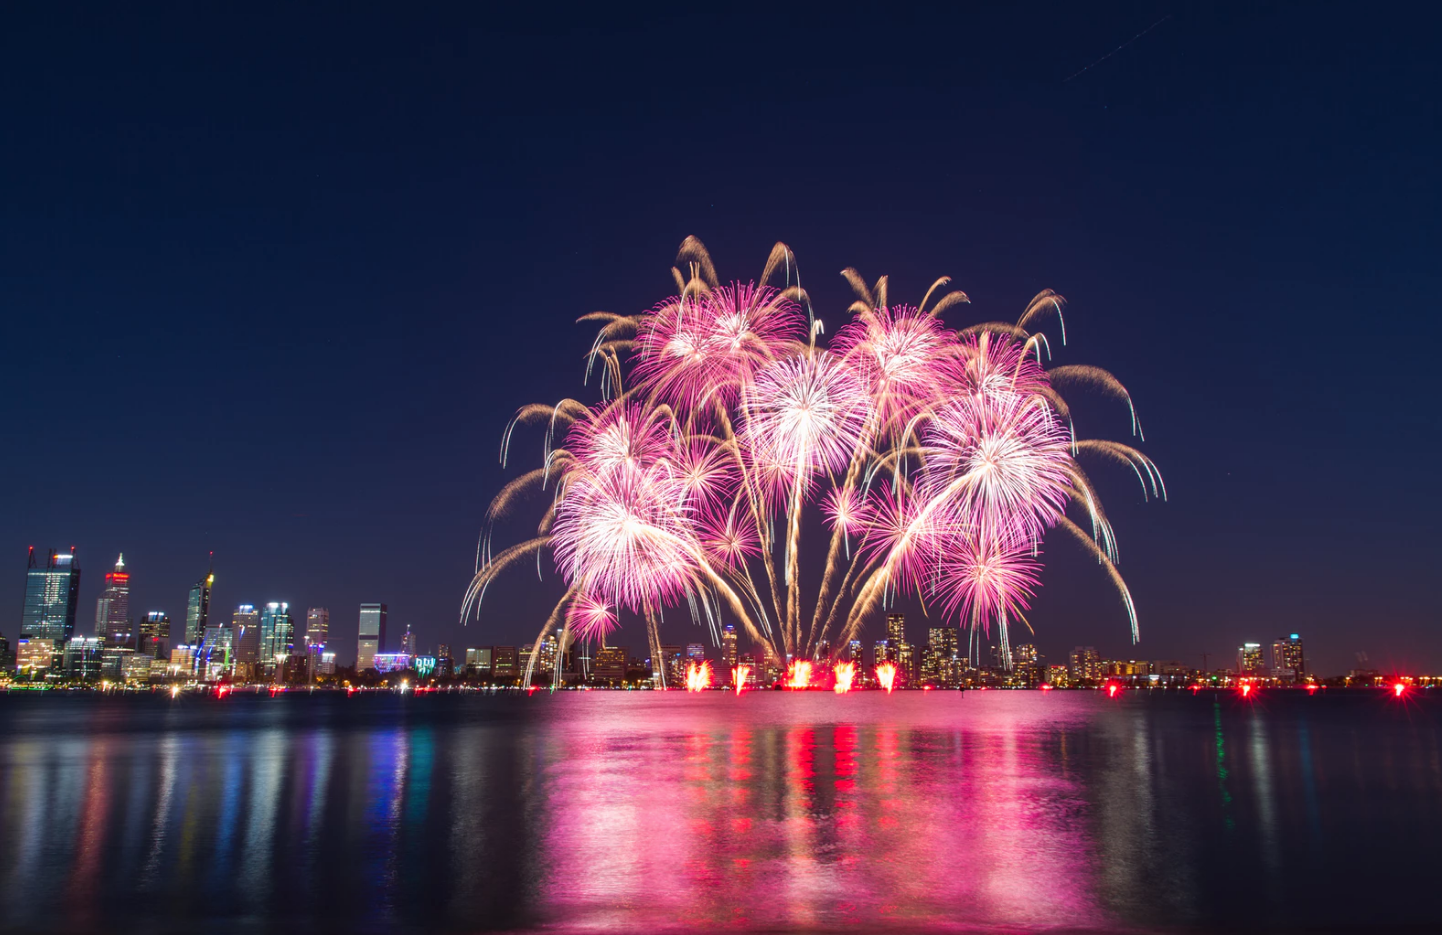 How Much Does a Professional Fireworks Display Cost?